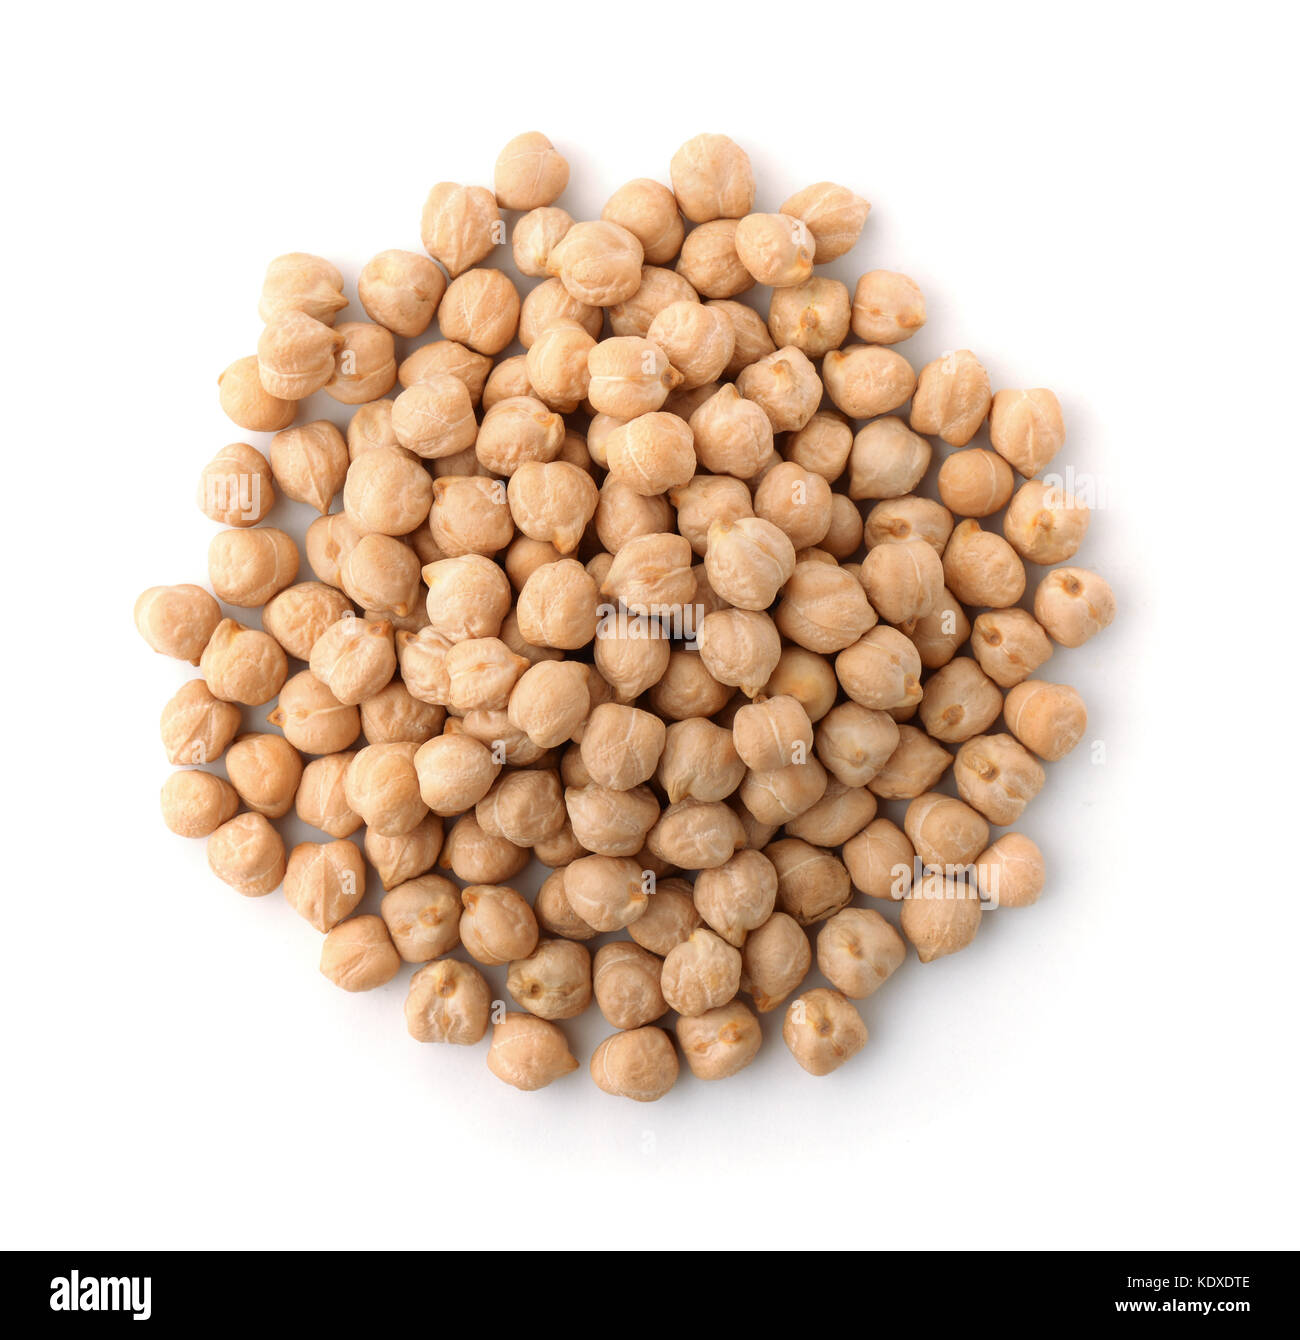 Pile of dried chickpeas isolated on white Stock Photo